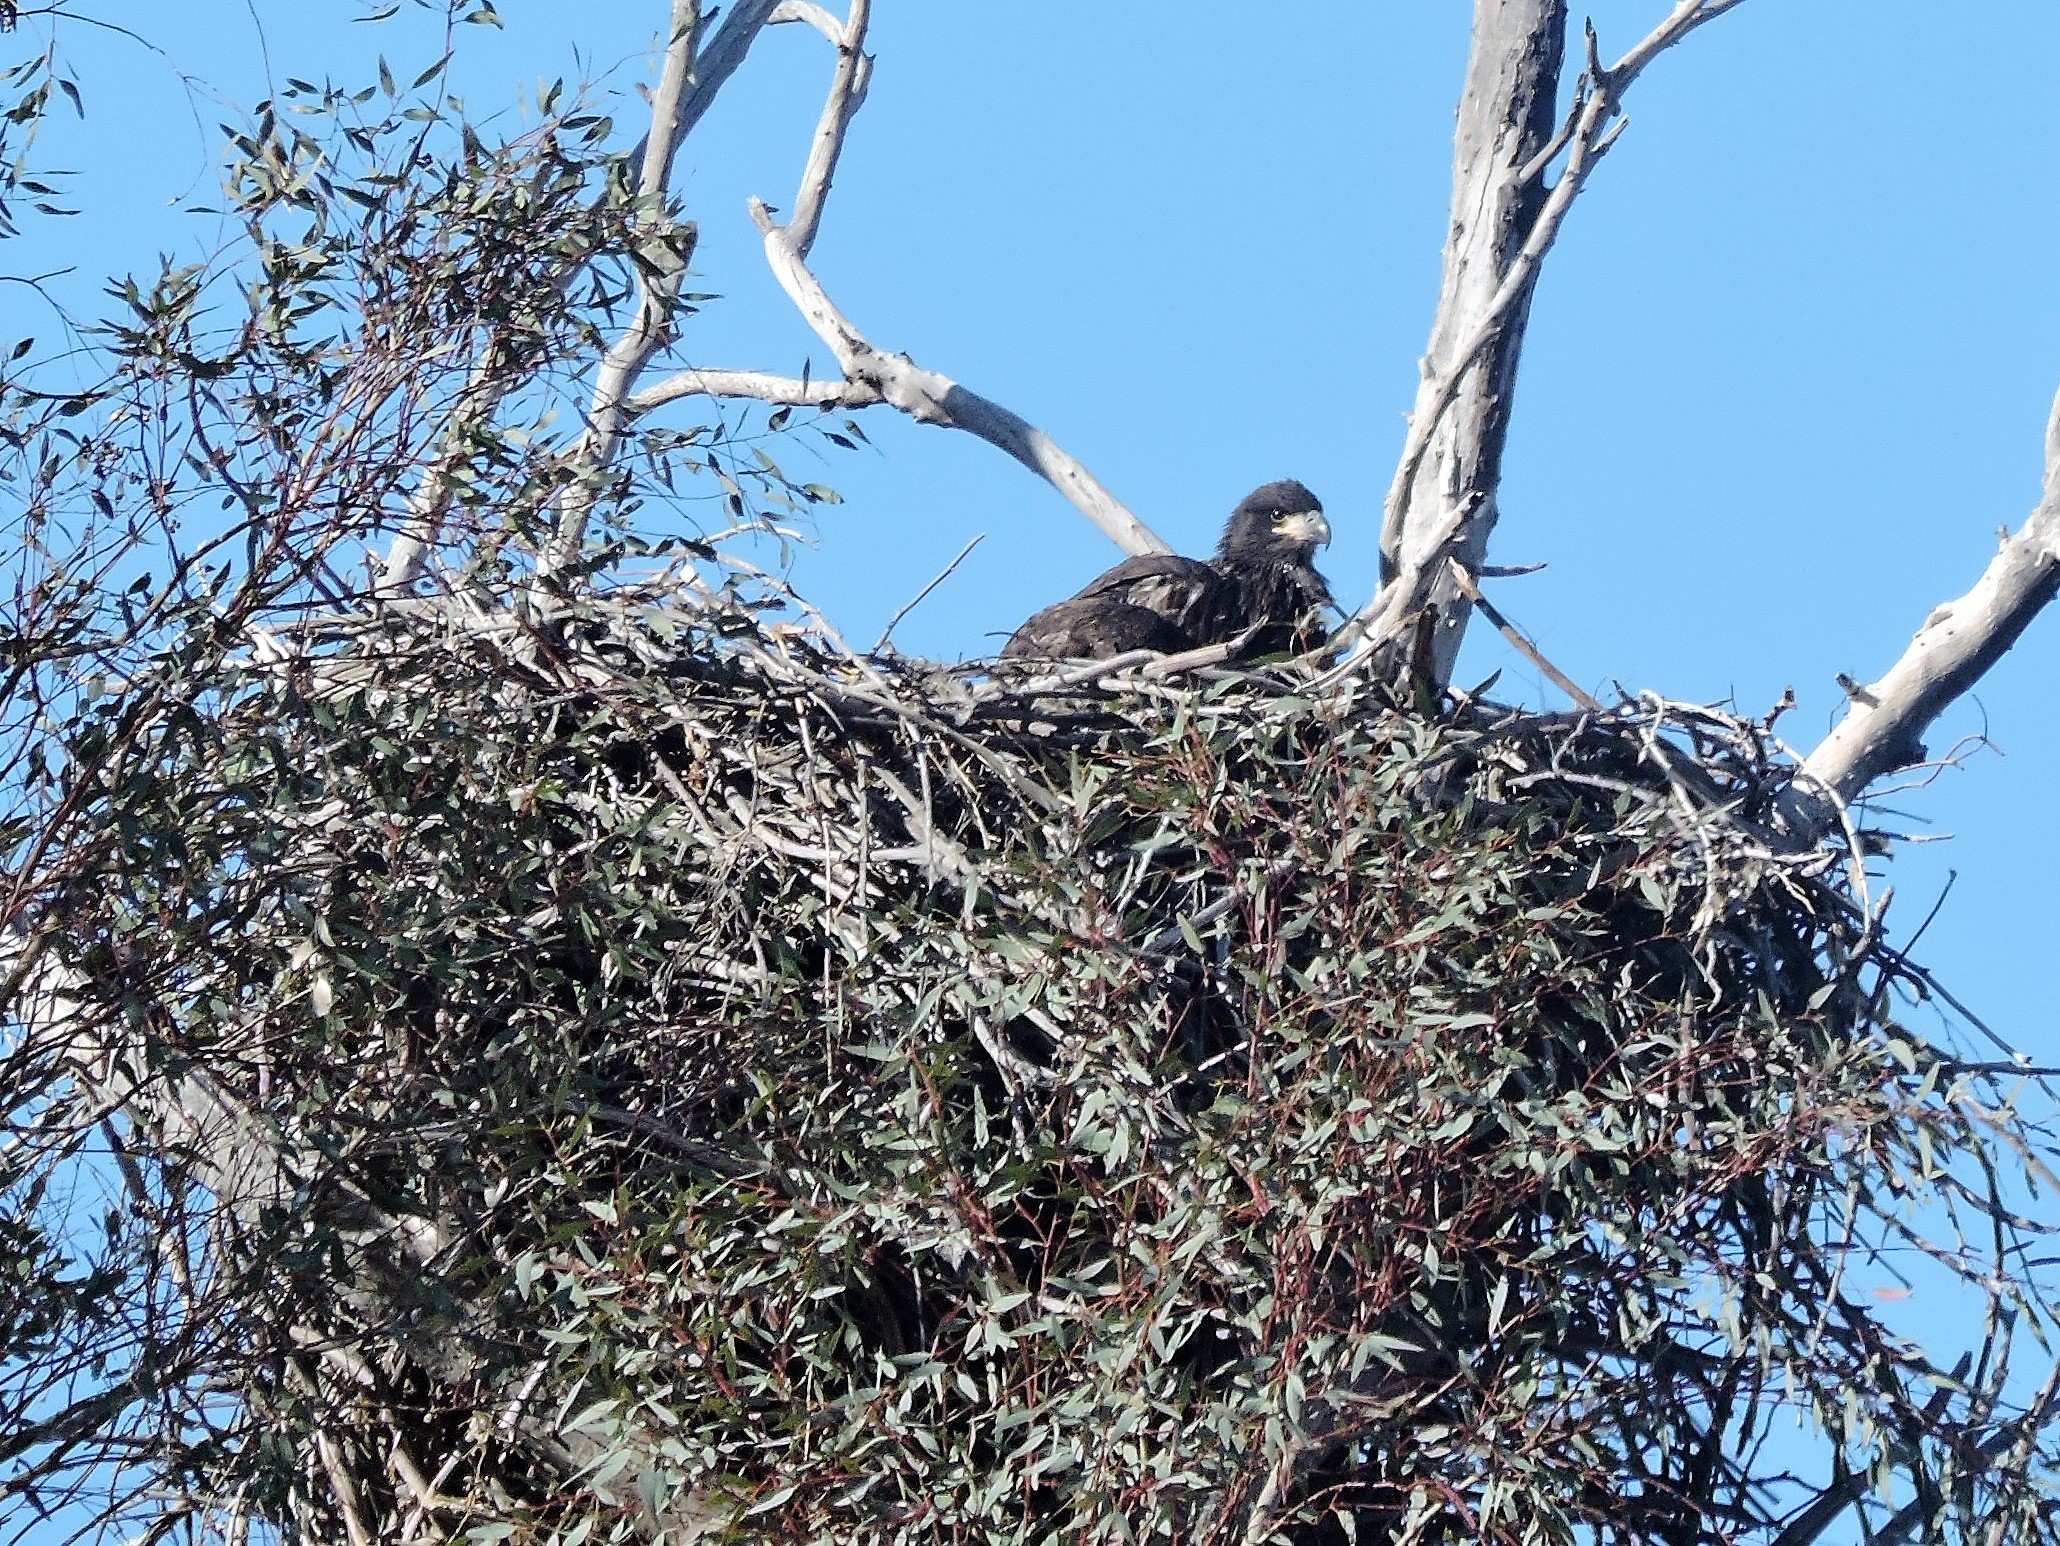 Photo by Caitlin Barton  |  Young Bald Eagle in Nest